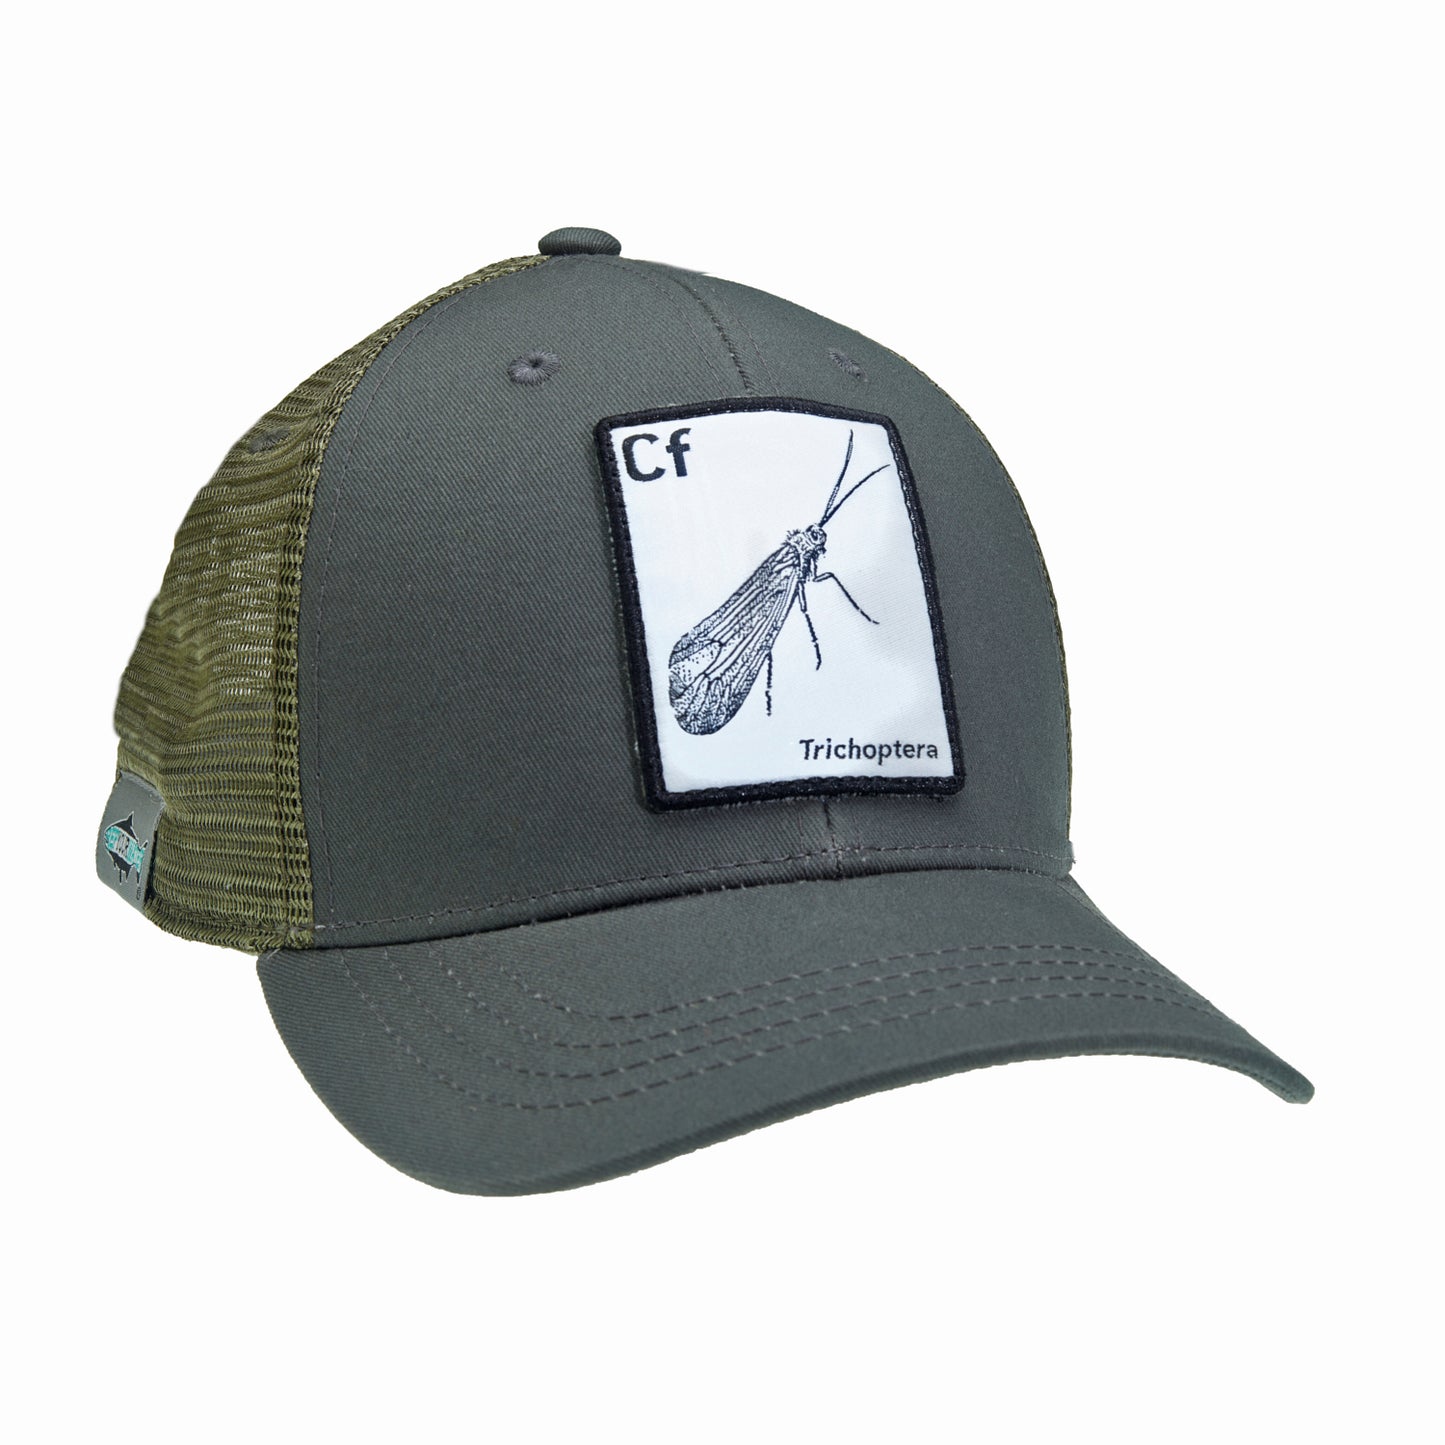 A hat with green mesh in back and green fabric in front has a rectangular patch that has a drawing of a caddis fly on it with the letters CF above it and the word trichoptera below it